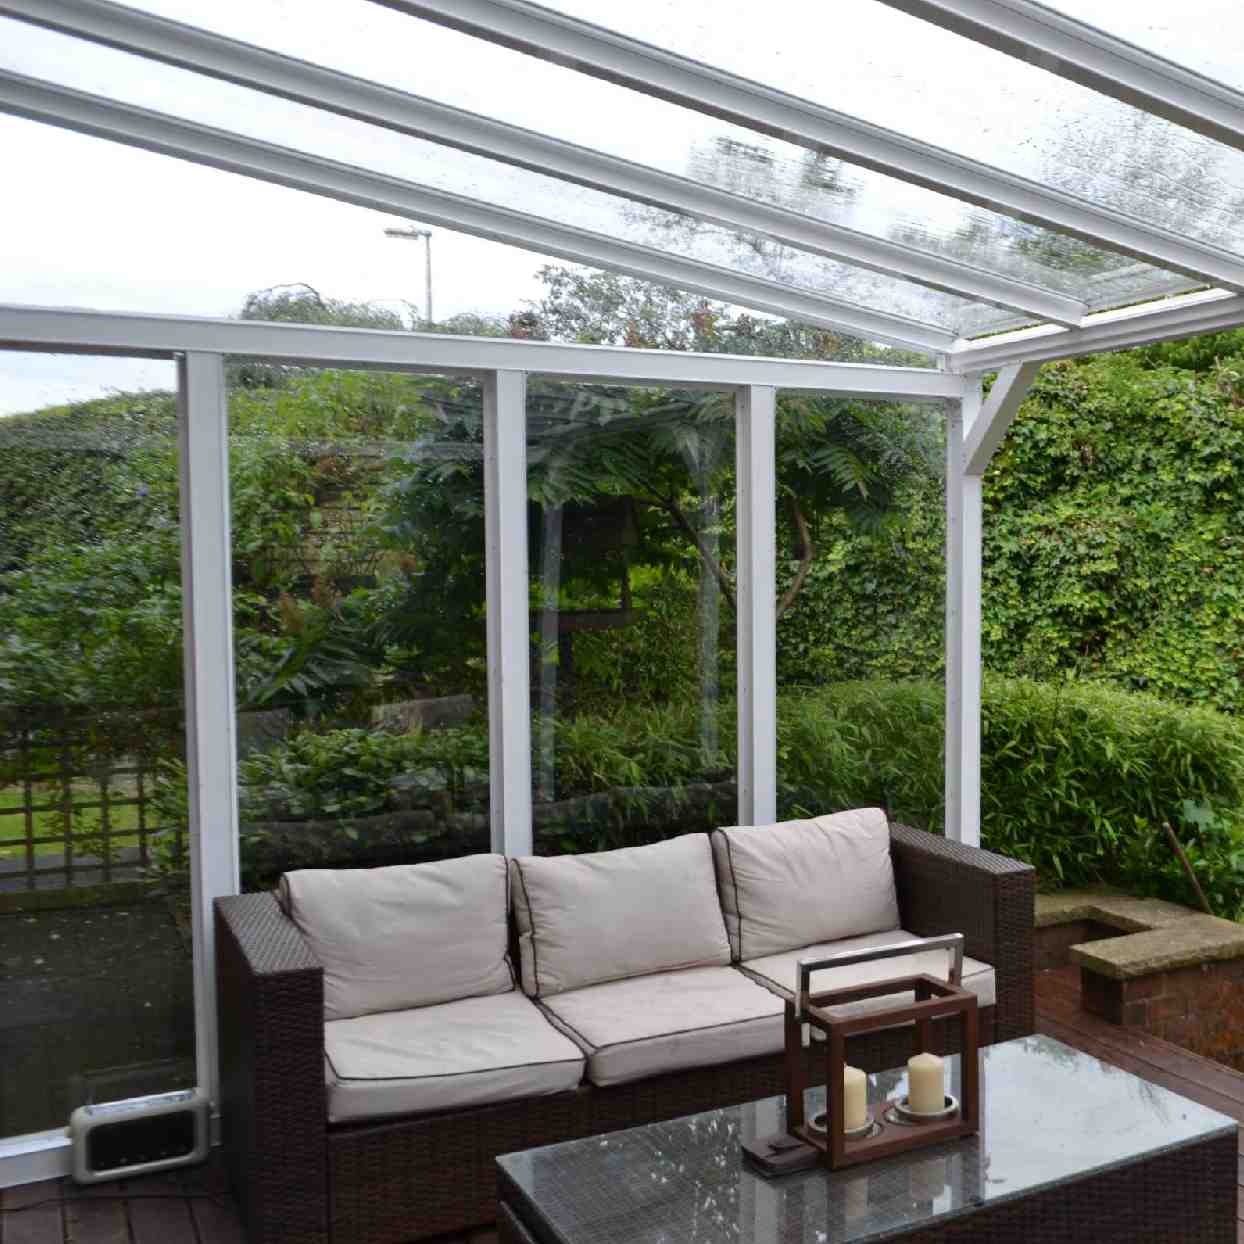 Buy Omega Verandah White with 6mm Glass Clear Plate Polycarbonate Glazing - 10.5m (W) x 2.0m (P), (5) Supporting Posts online today